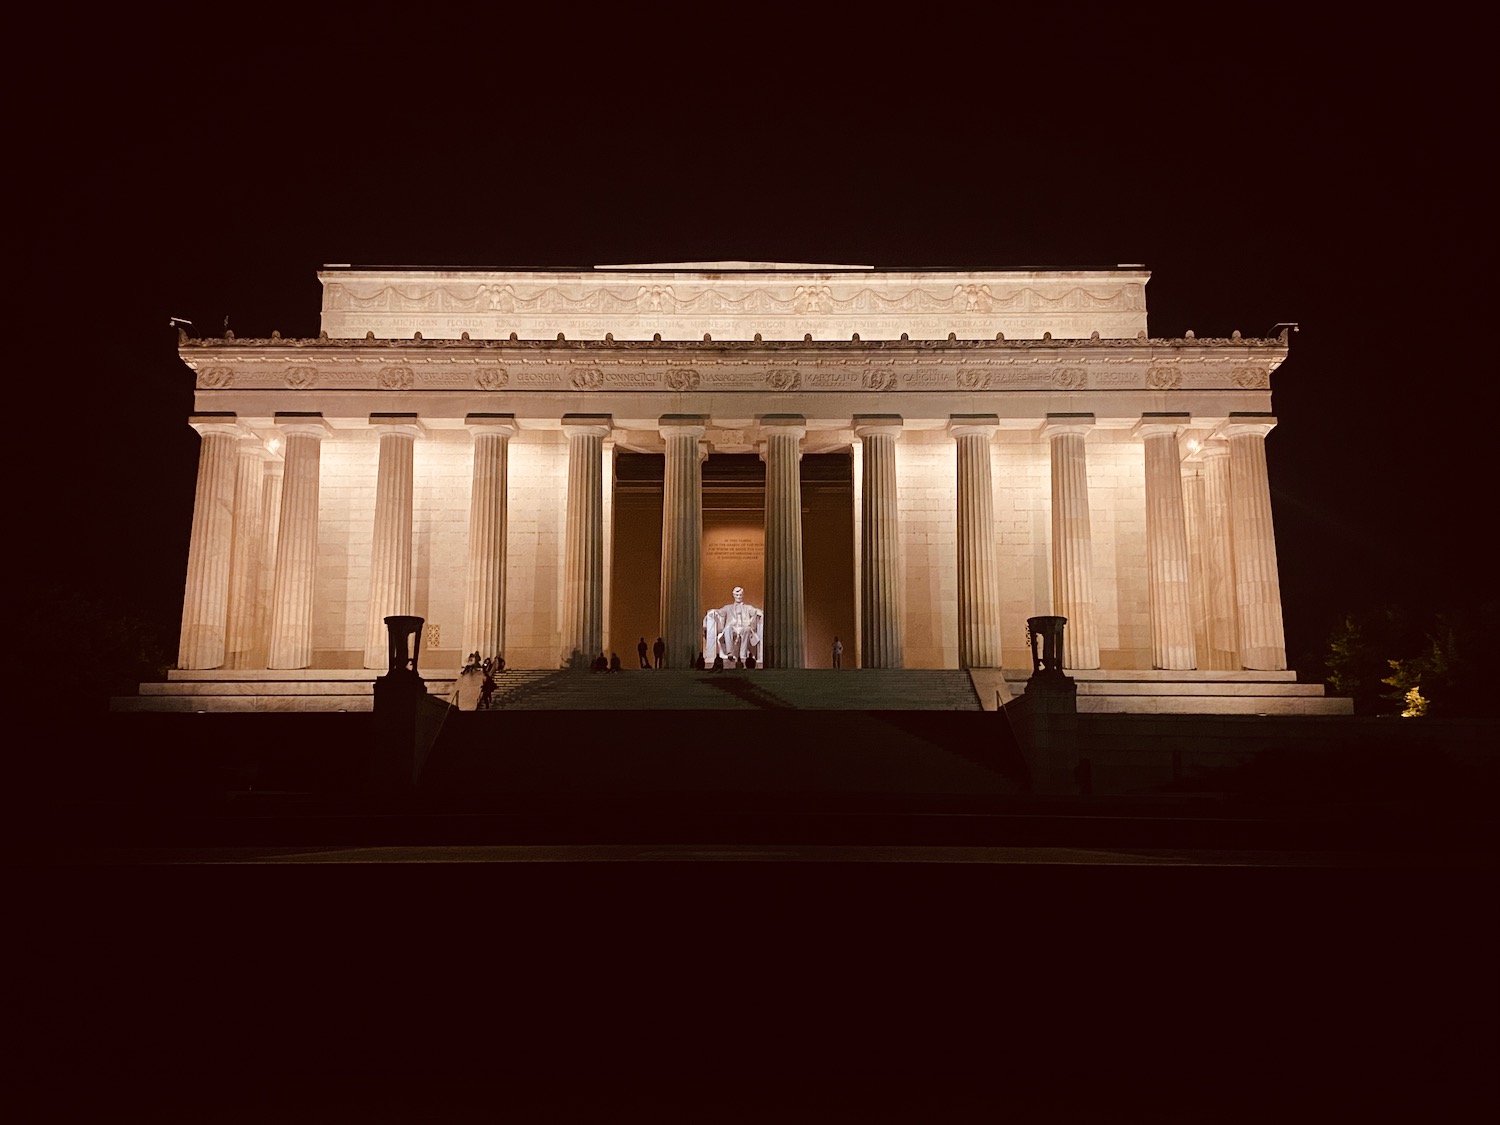 Lincoln Memorial with columns at night